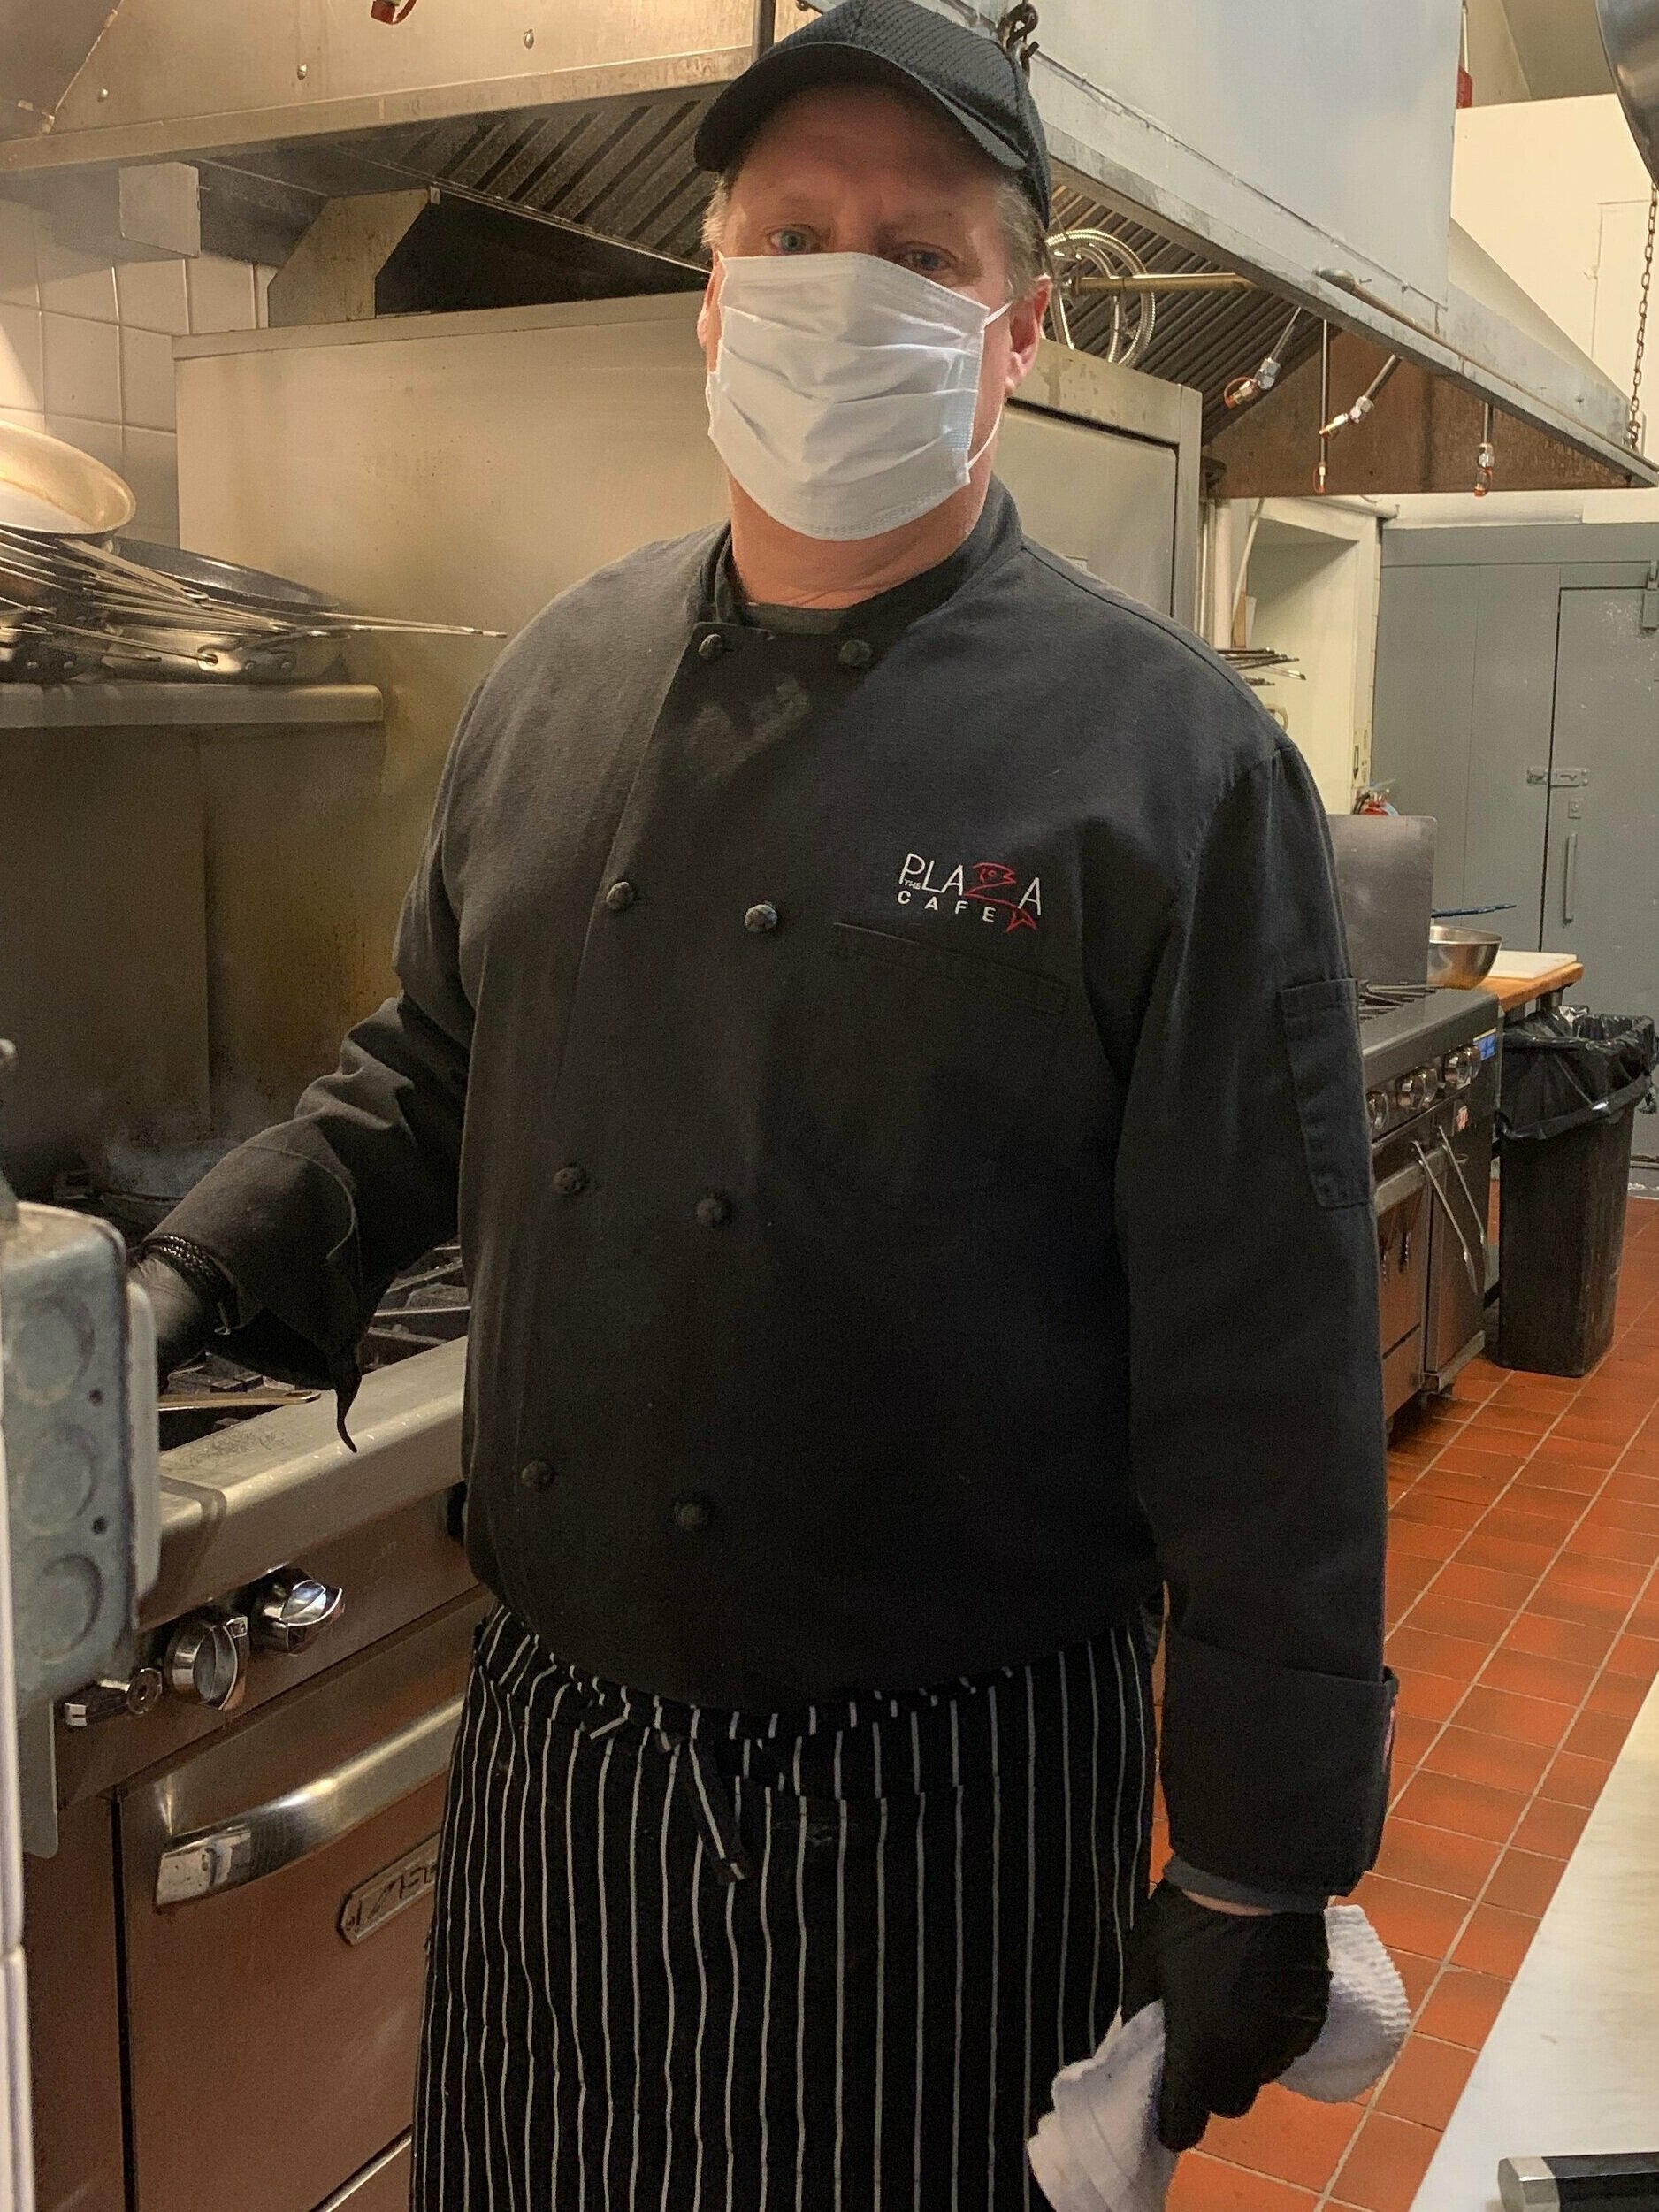 Doug Dulija, chef and owner of The Plaza Cafe in Southampton, suited up for a day in the kitchen.